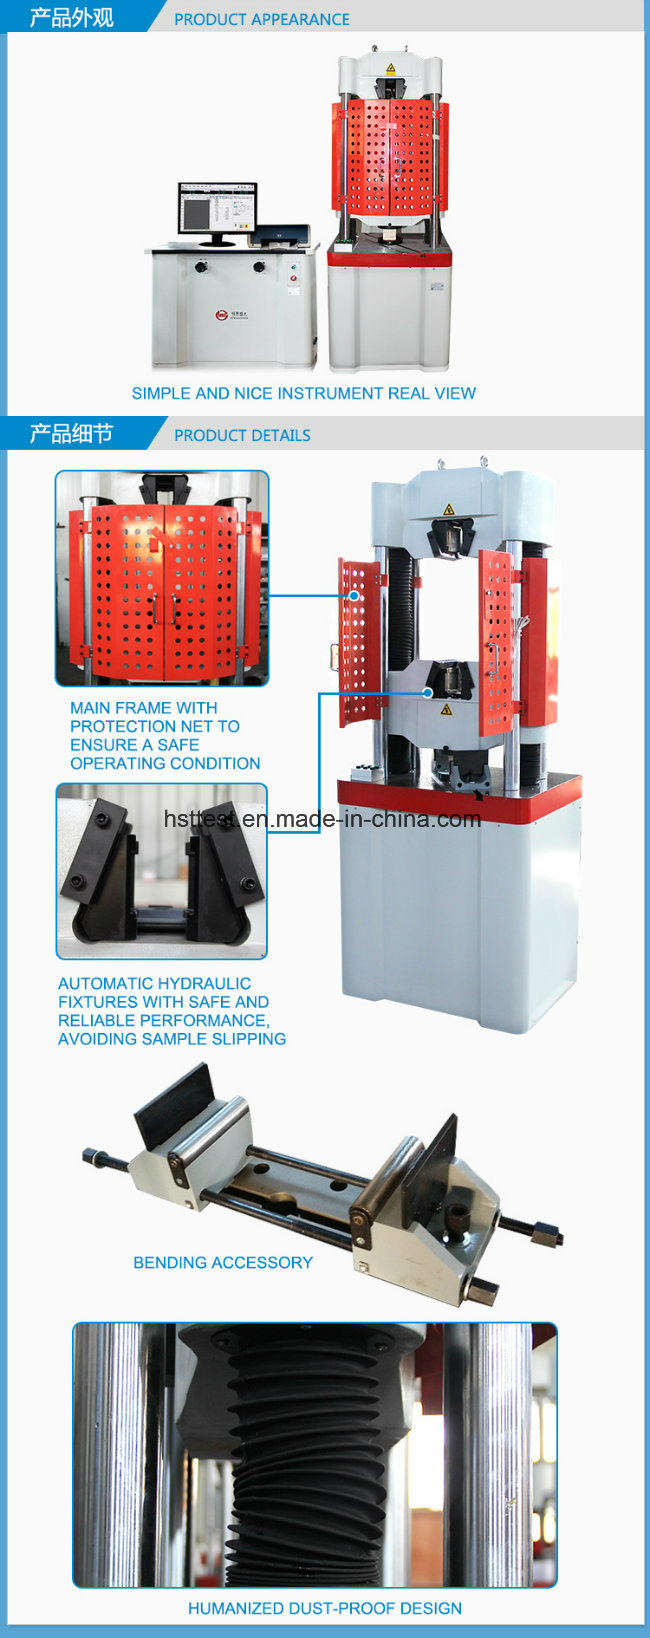 China Supplier Mechanical Universal Testing Equipment for Metal Steel Materials